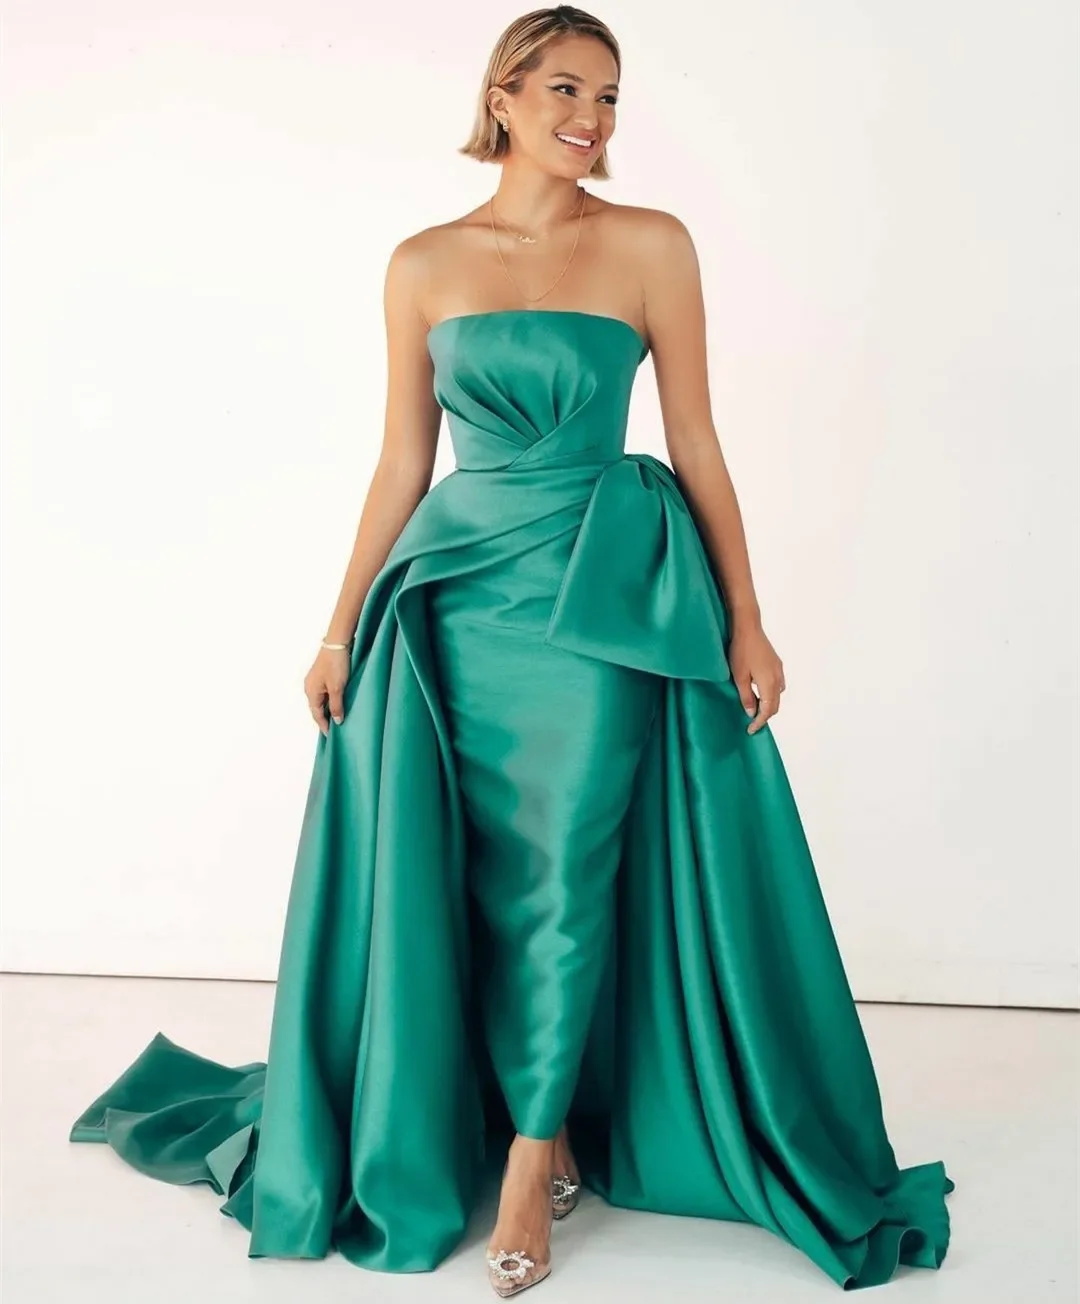 Mermaid Sweep Train Pleats Formal Prom Dress for Women Muslim Ankle Length Party Gowns Green Strapless Evening Dresses prom dres